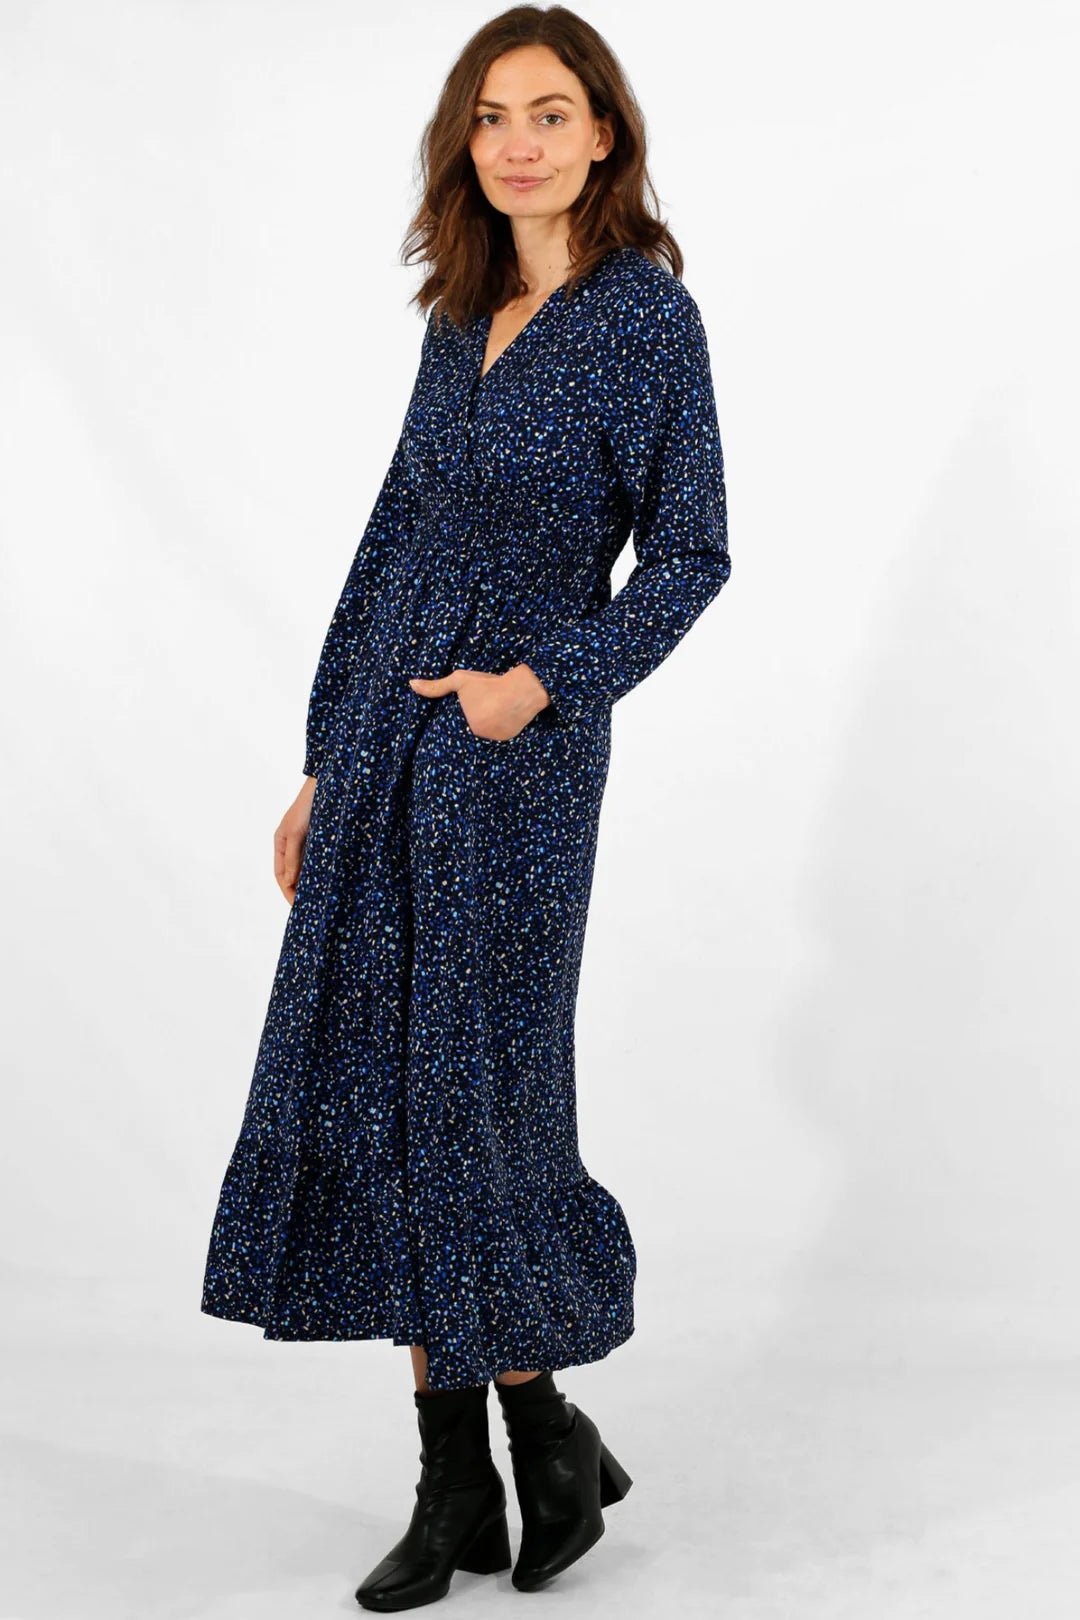 Blue Speckled Maxi Dress